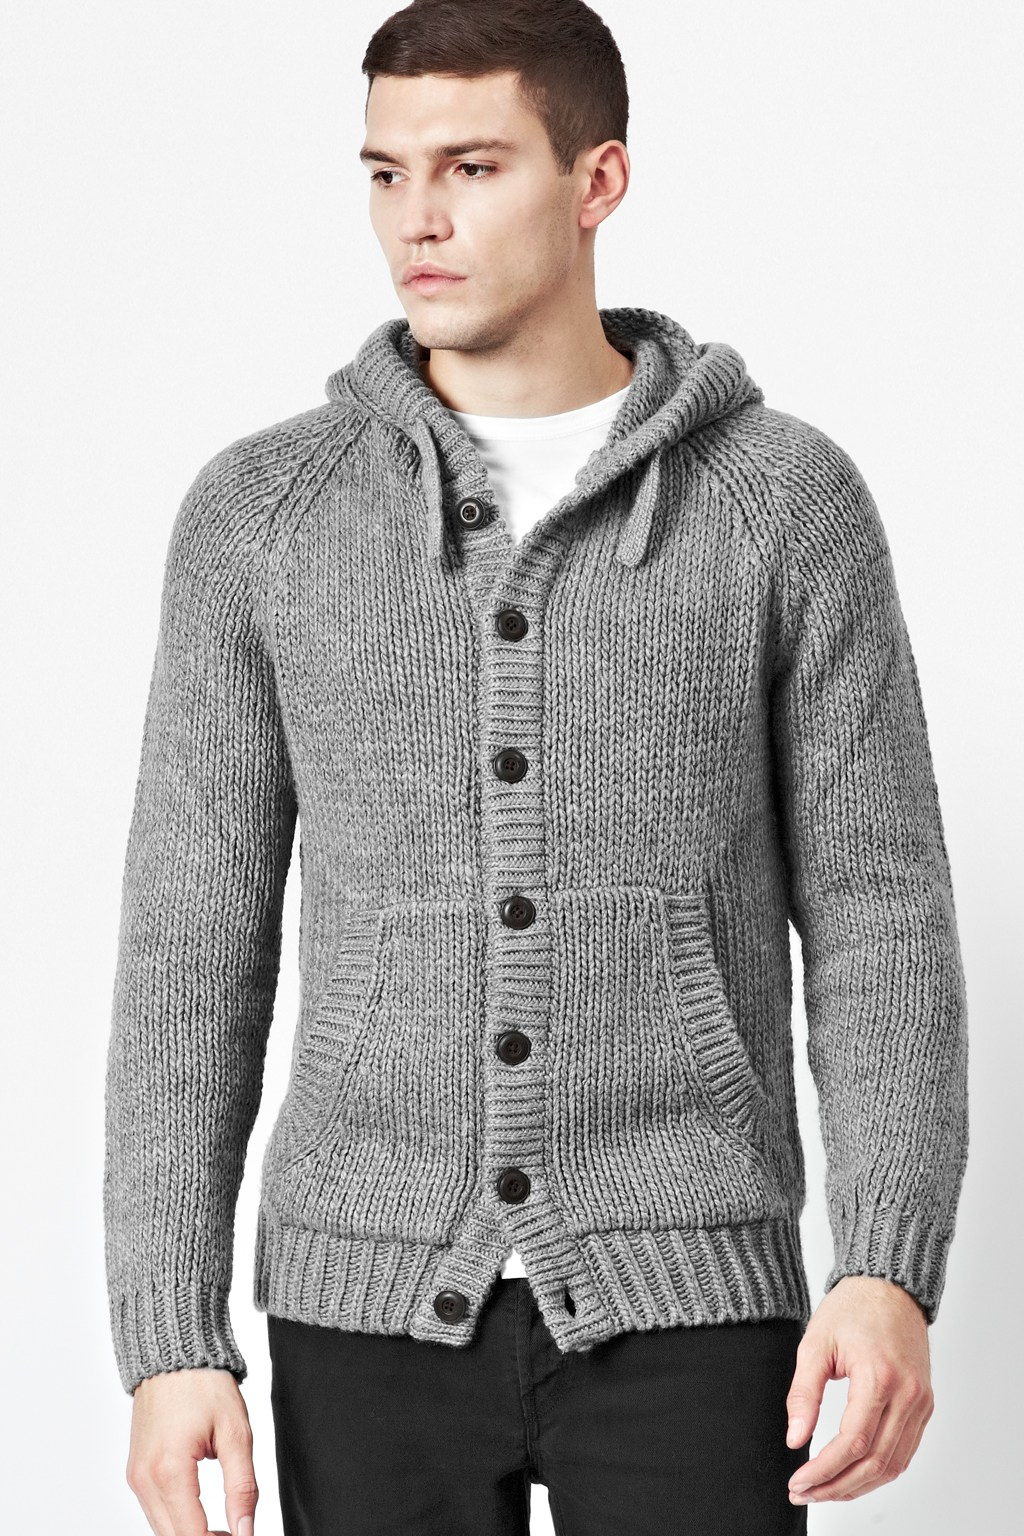 Lyst - French connection Delta Chunky Cardigan in Gray for Men